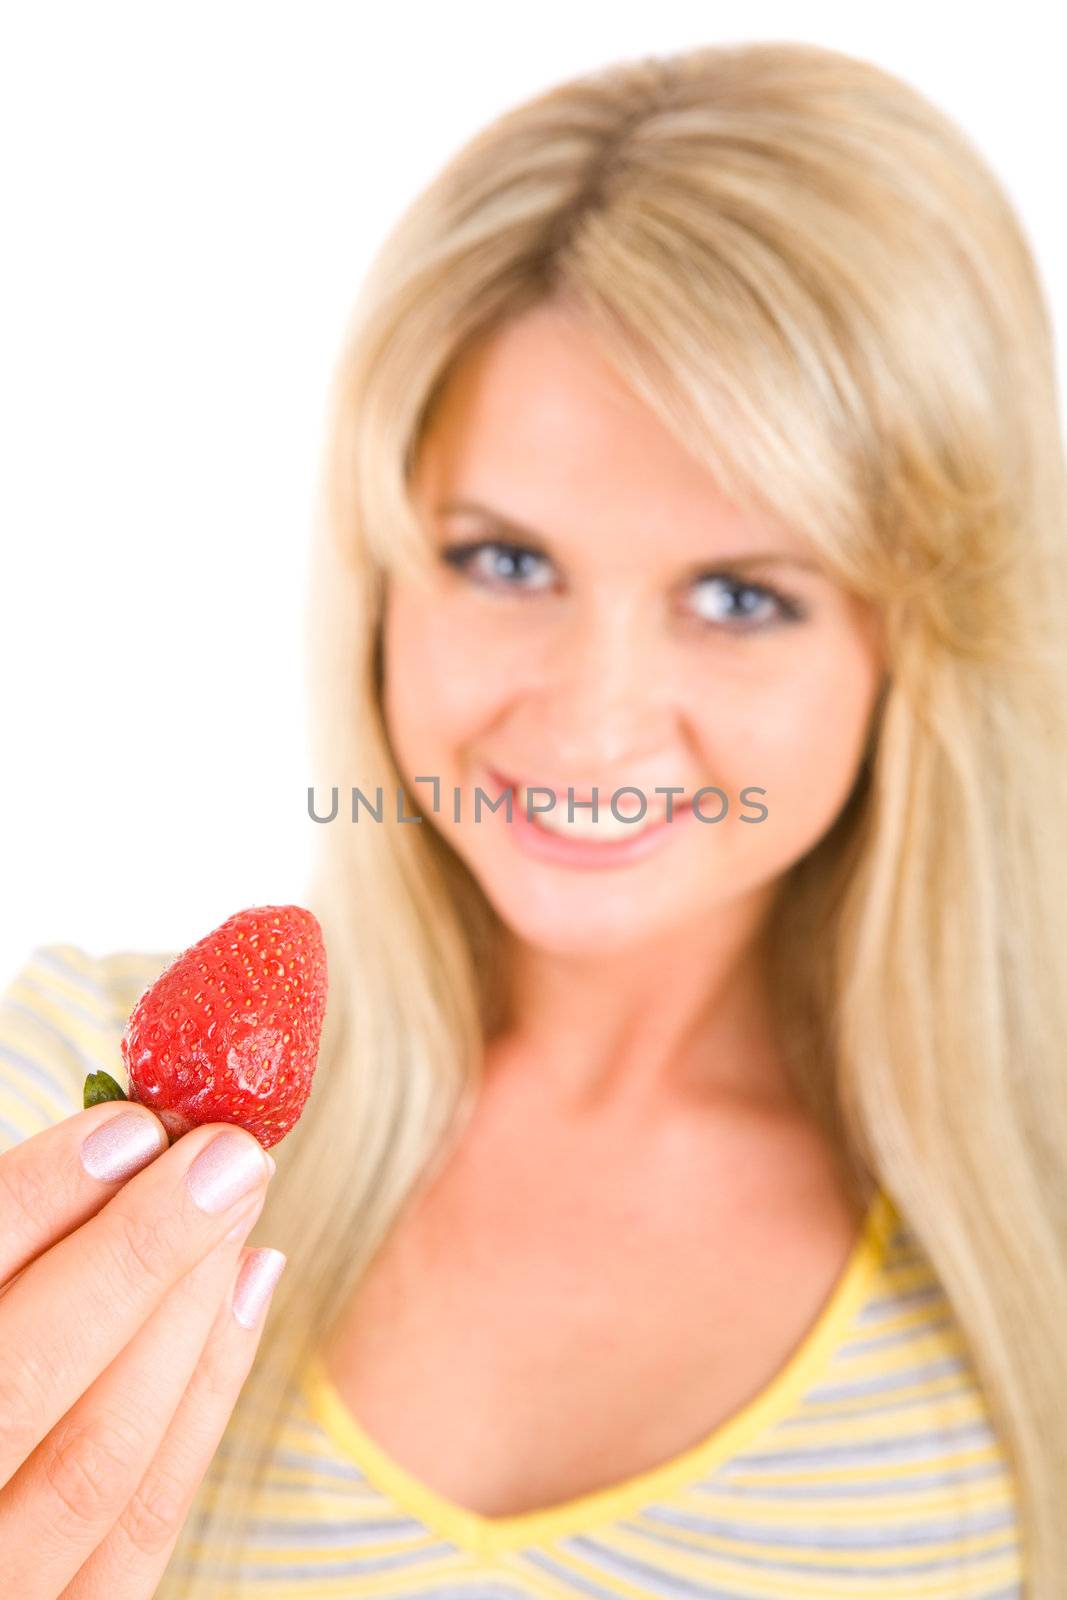 tasty strawberry in hands of the long haired beauty